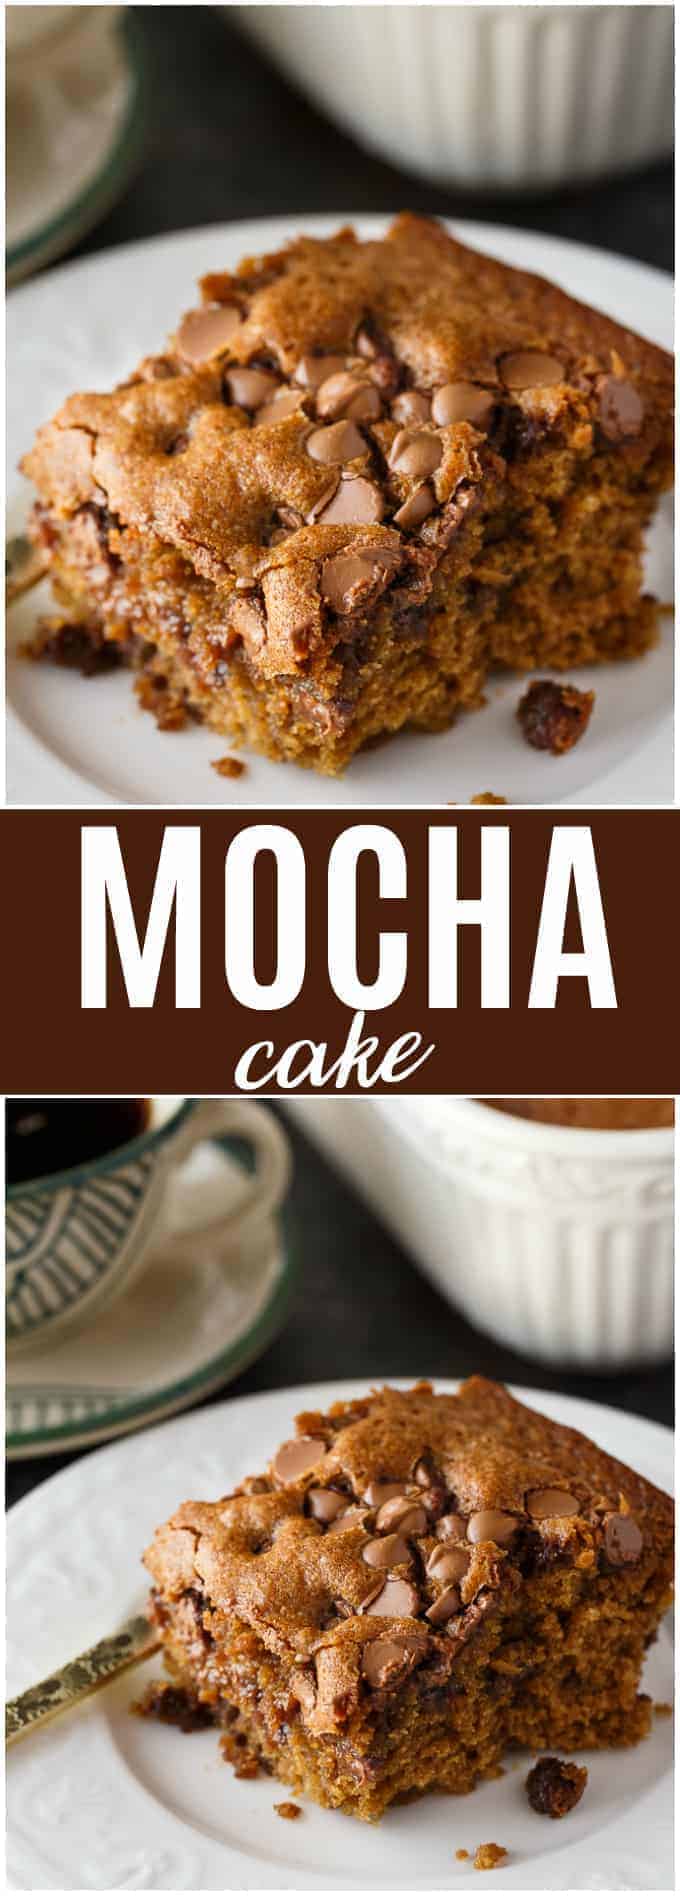 Mocha Cake - Serve with coffee or tea. It's wonderfully moist and delicious with hints of chocolate and coffee flavours.